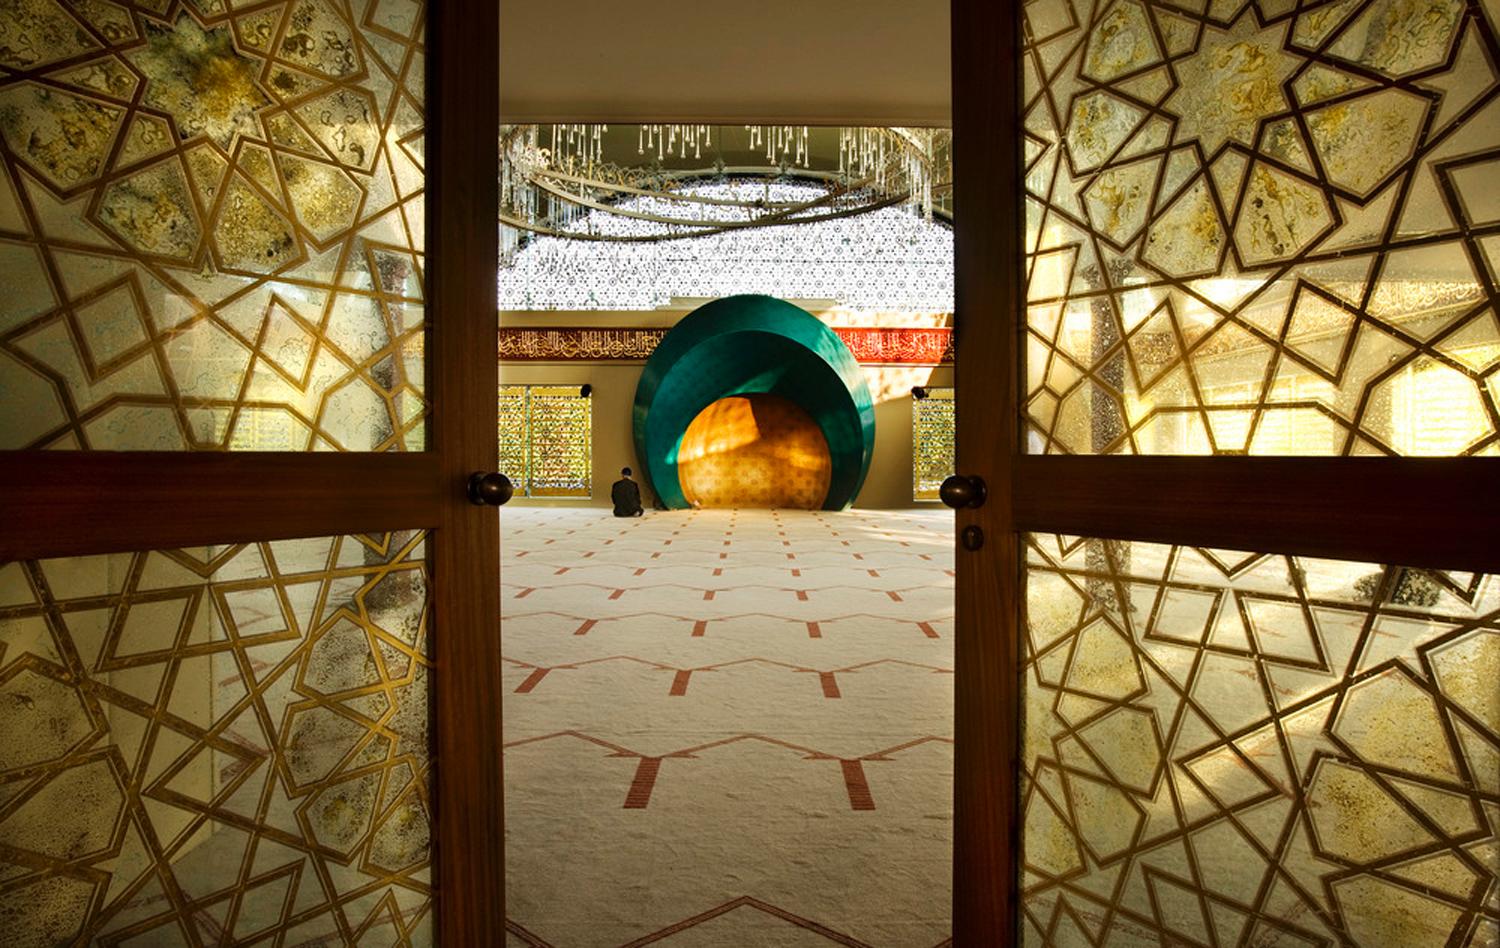 View of the entrance of interior of the mosque and door applications in islamic motifs behind glass